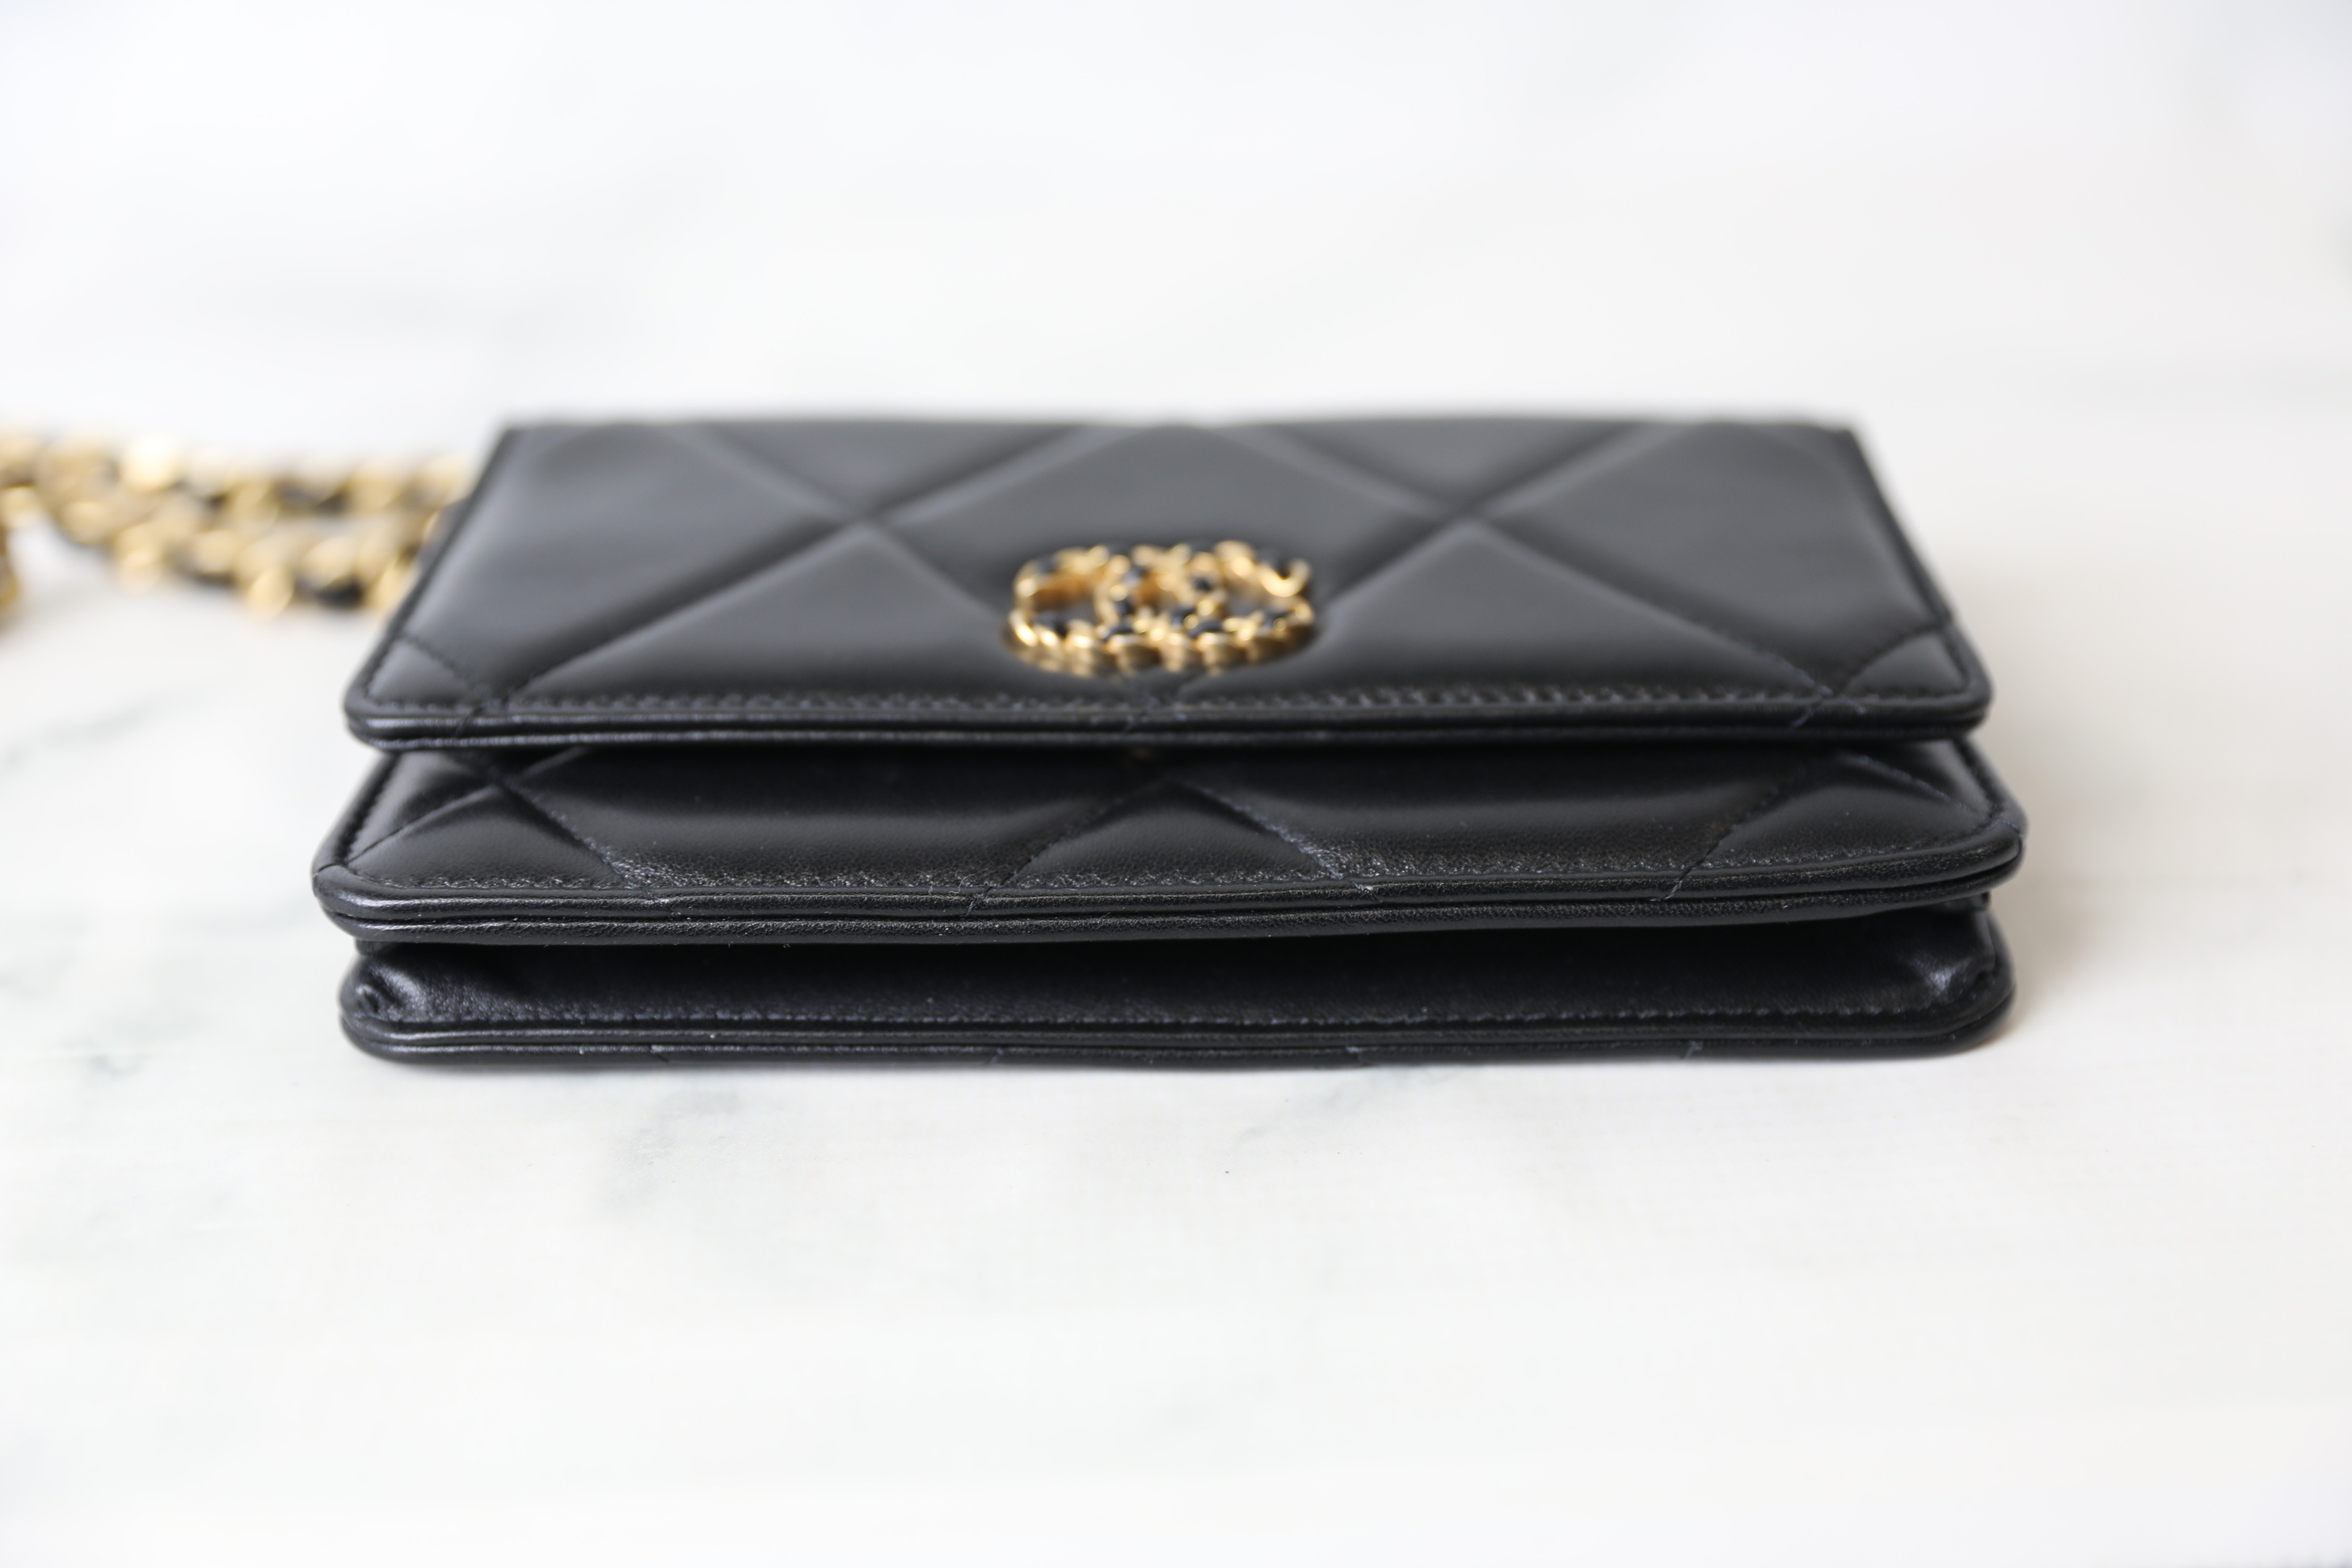 The ‘Sacred Order’ Wallet w/ Chain